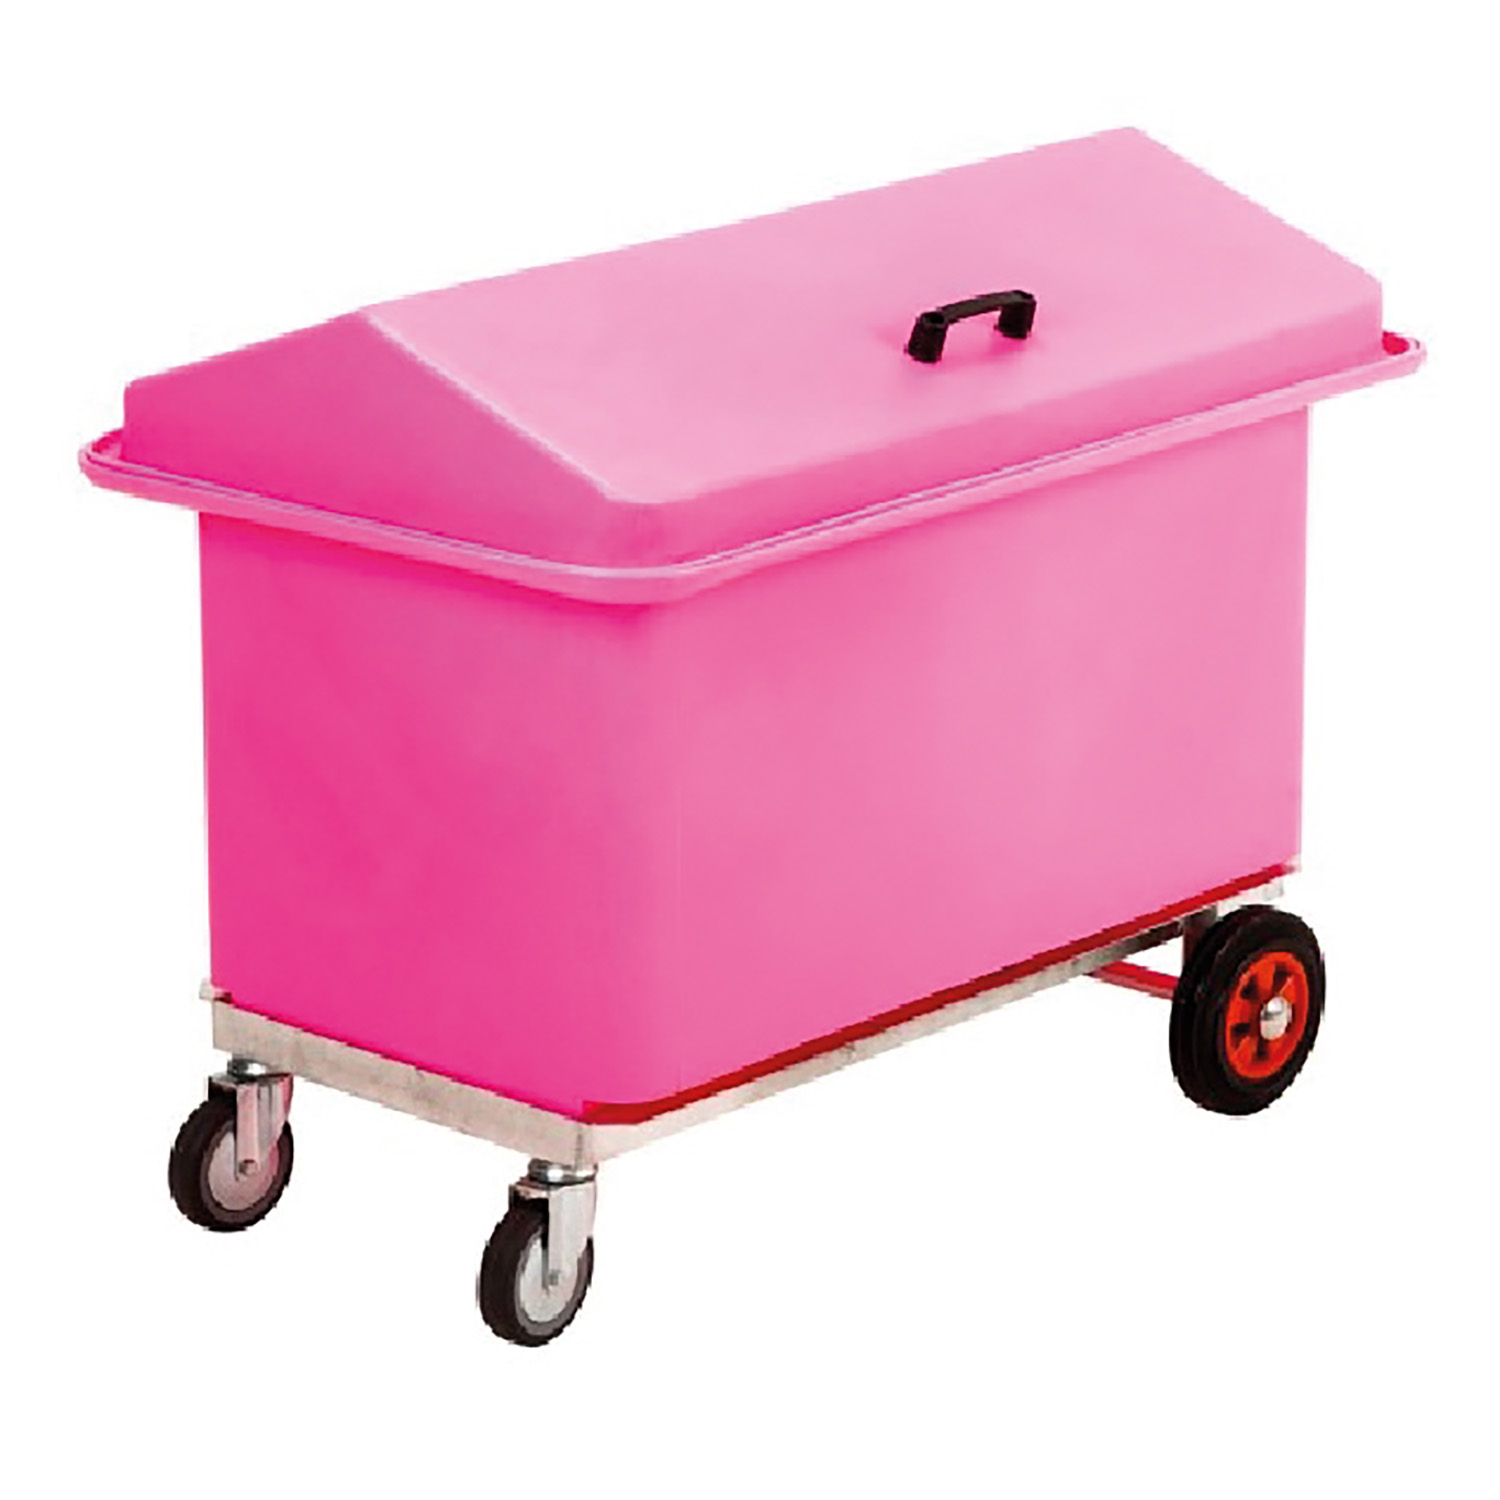 STUBBS MOBILE CHEST TWO COMPARTMENTS S58425 PINK TWO COMPARTMENT MOBILE